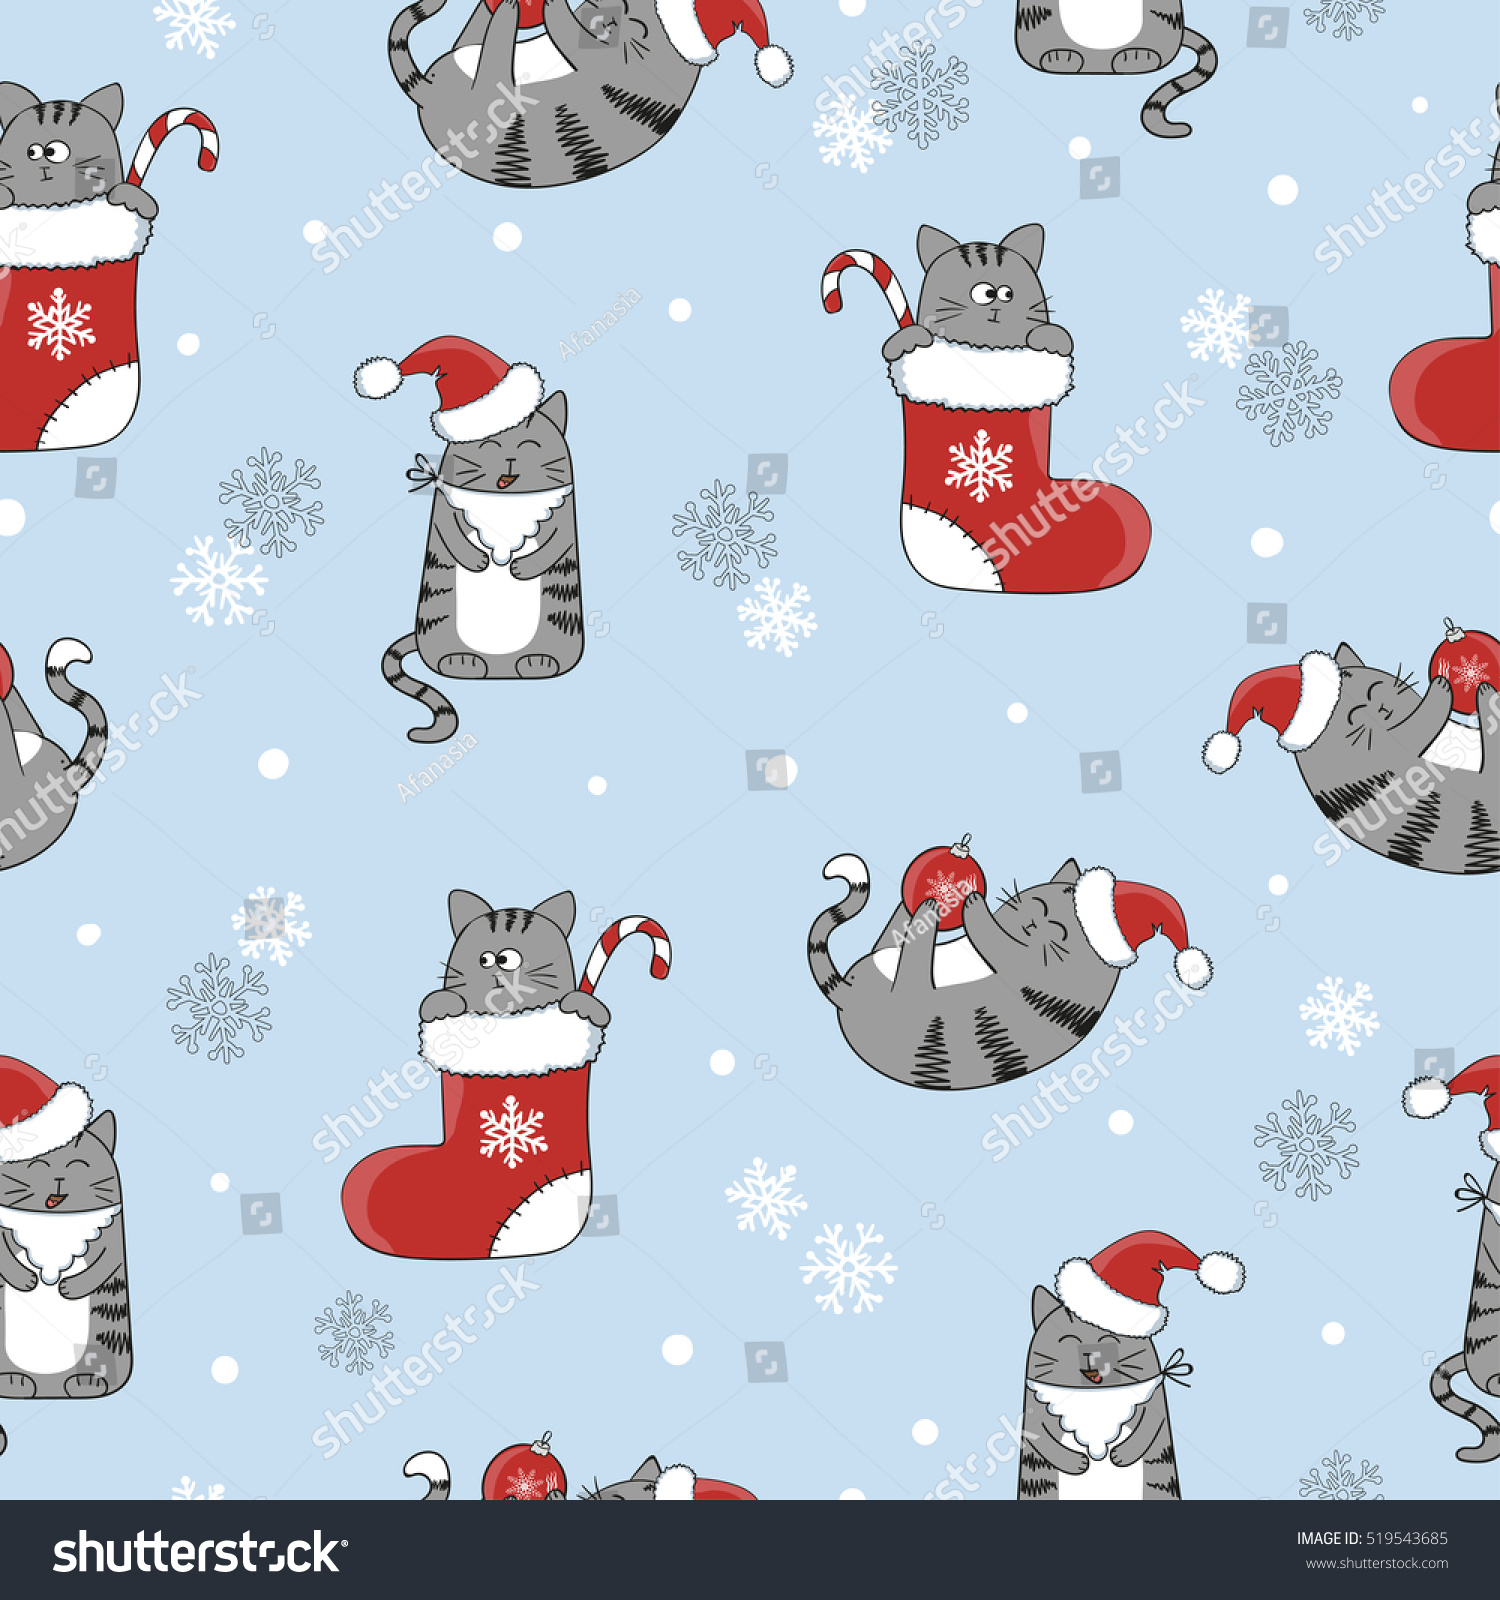 Christmas and New Year seamless pattern with cute cartoon cats Vector holiday winter background